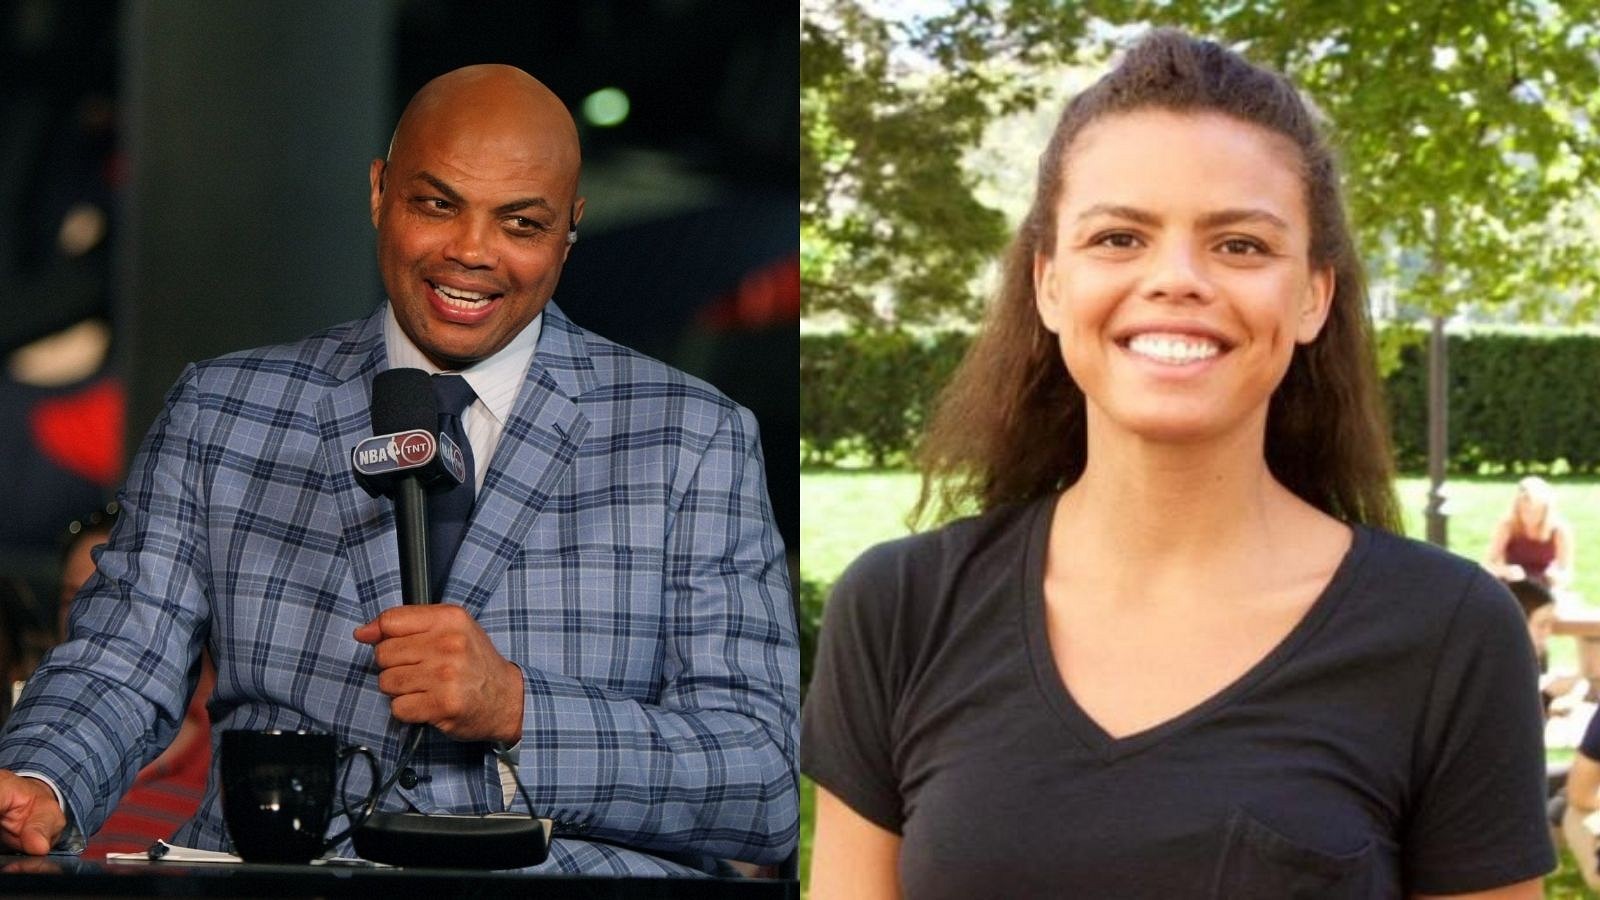 “‘Women be milking that baby thing’? A sprained ankle is spa treatment compared to childbirth”: Charles Barkley ‘s daughter responds to his old disturbing joke